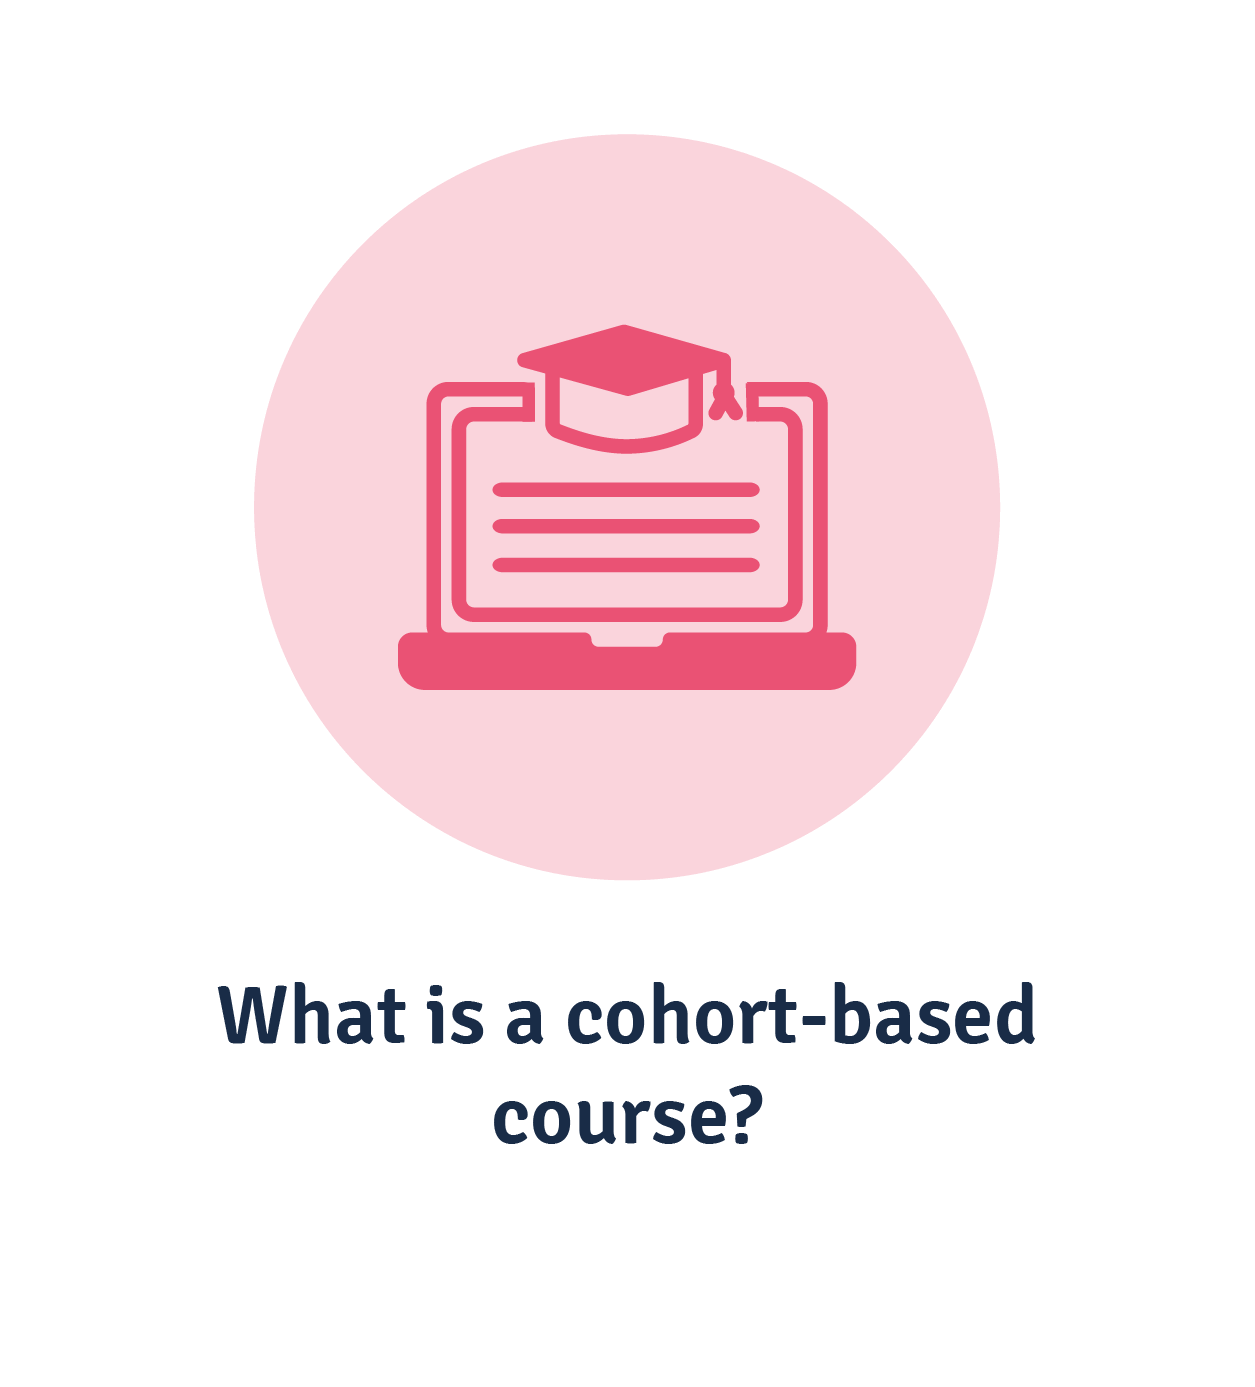 What is a cohort-based course?